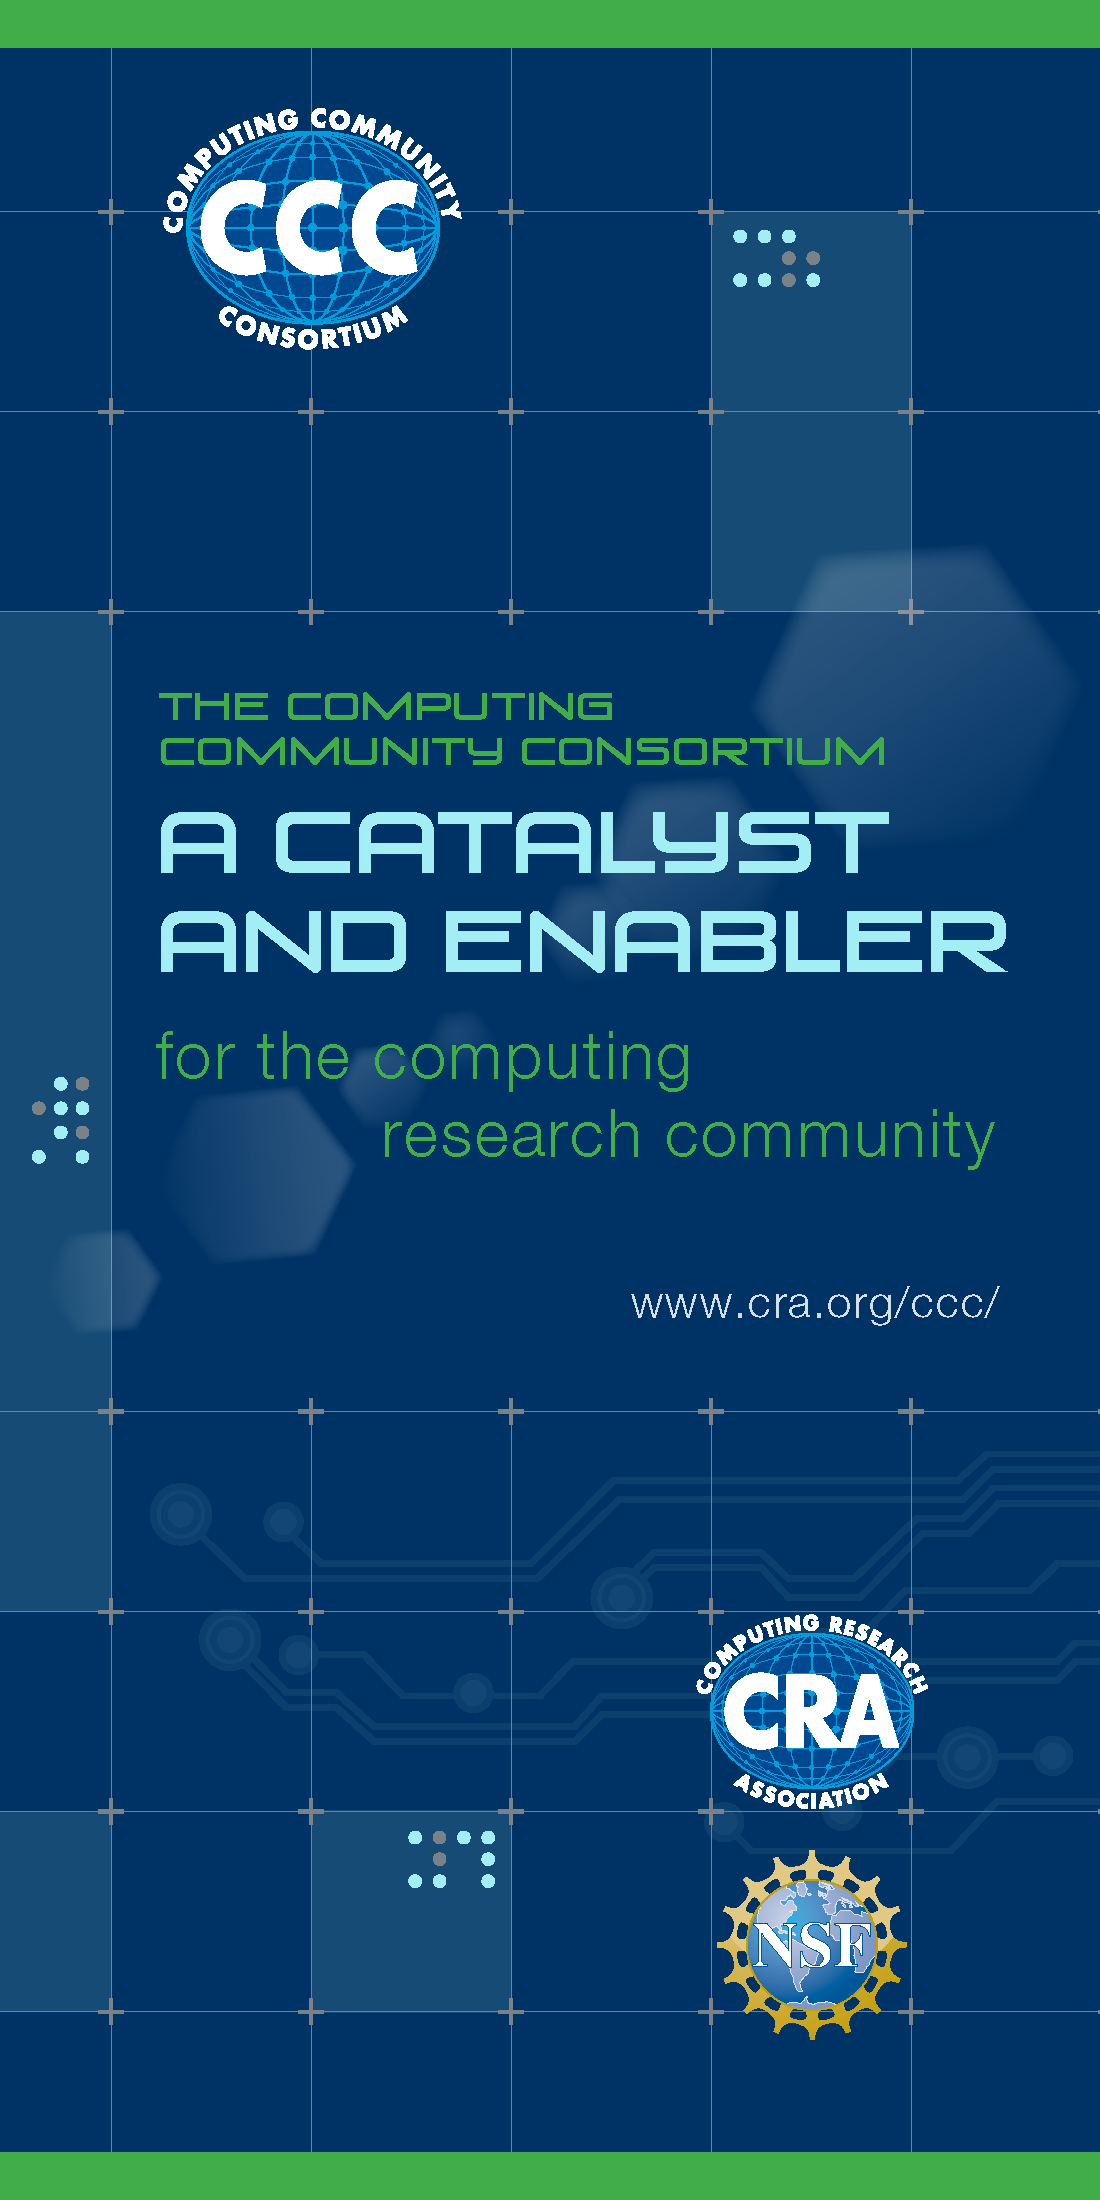 Click to download the new CCC brochure.